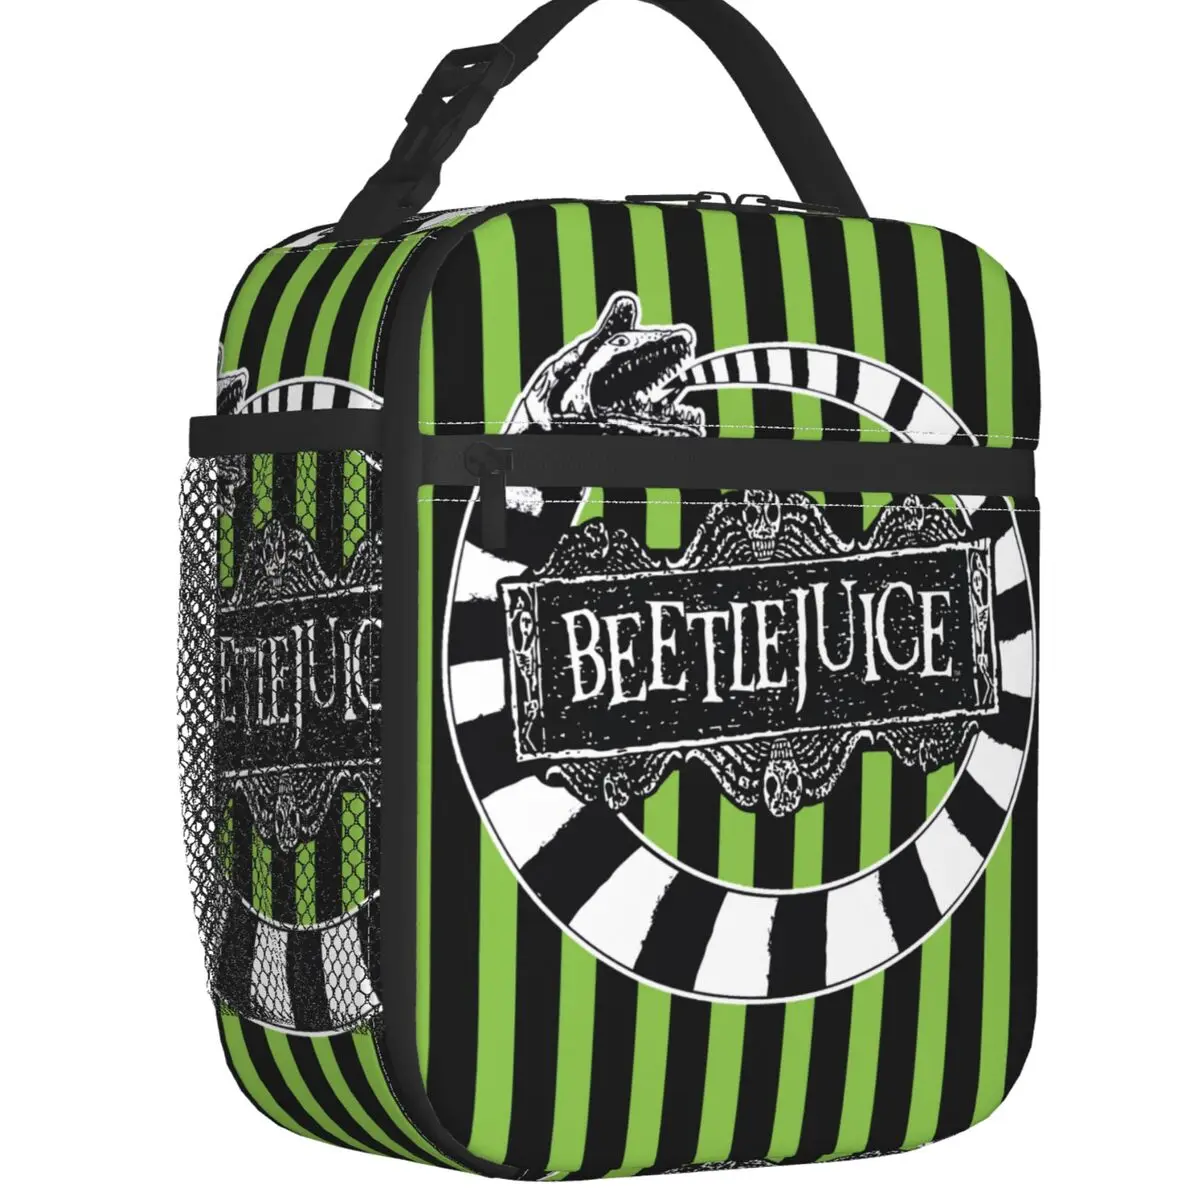 

Beetlejuice Beetle Worm Lunch Box Multifunction Tim Burton Horror Movie Thermal Cooler Food Insulated Lunch Bag School Children